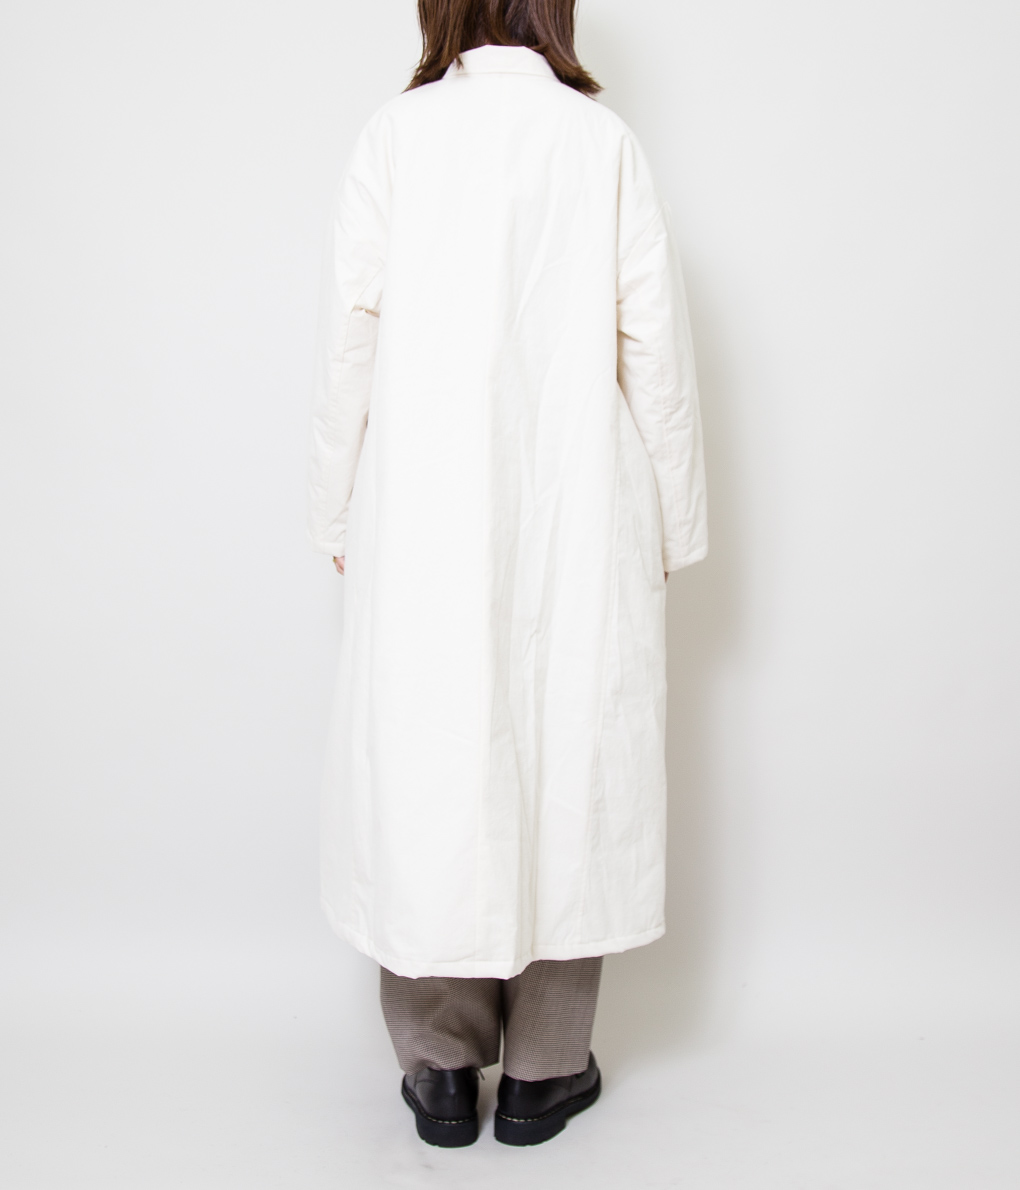 New Arrival “YARMO Quilting Lab Coat” | well-made by MAIDENS SHOP